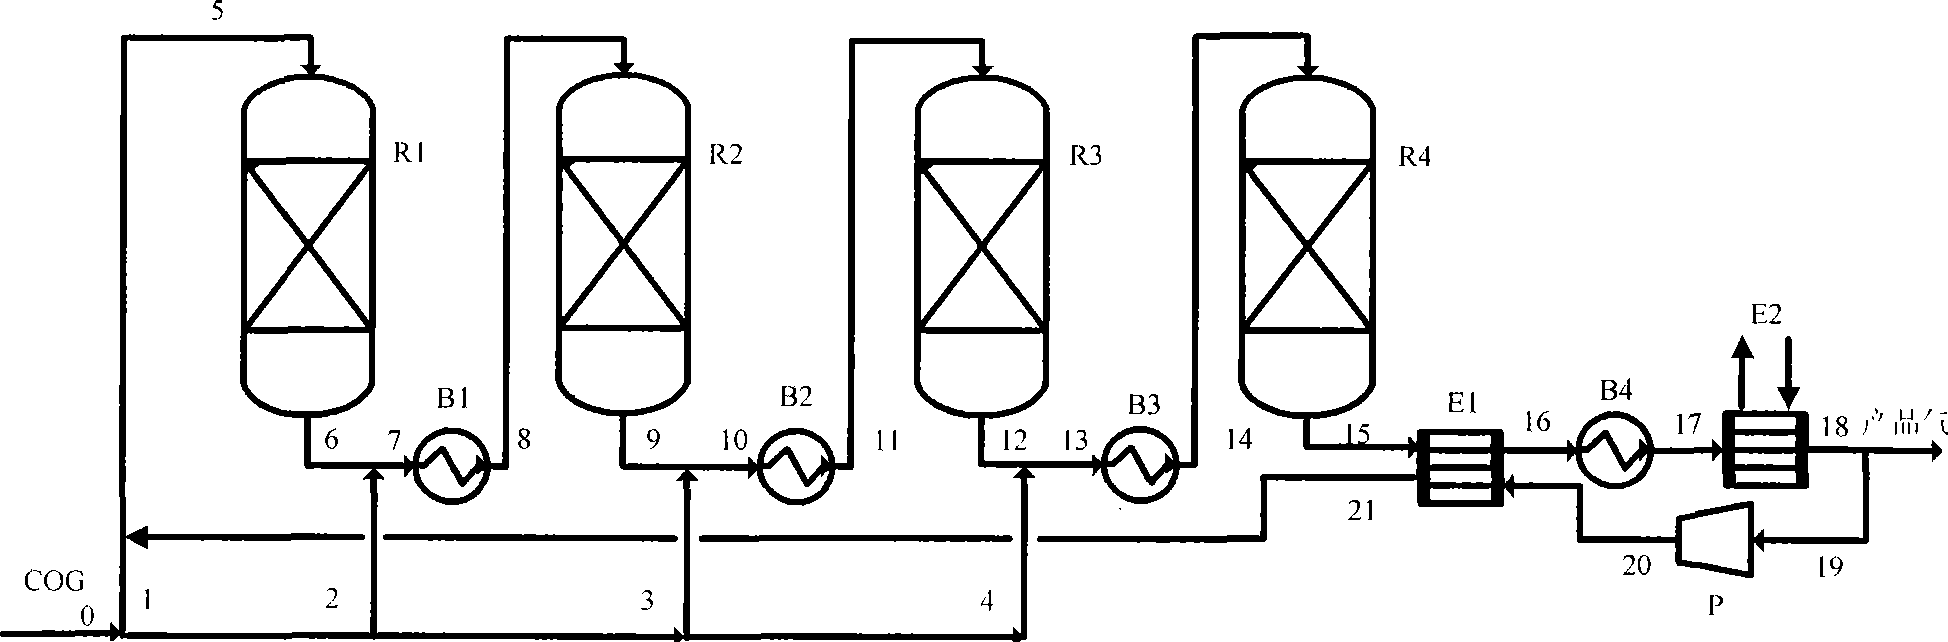 Methanation reaction process using oven gas to prepare substitute natural gas